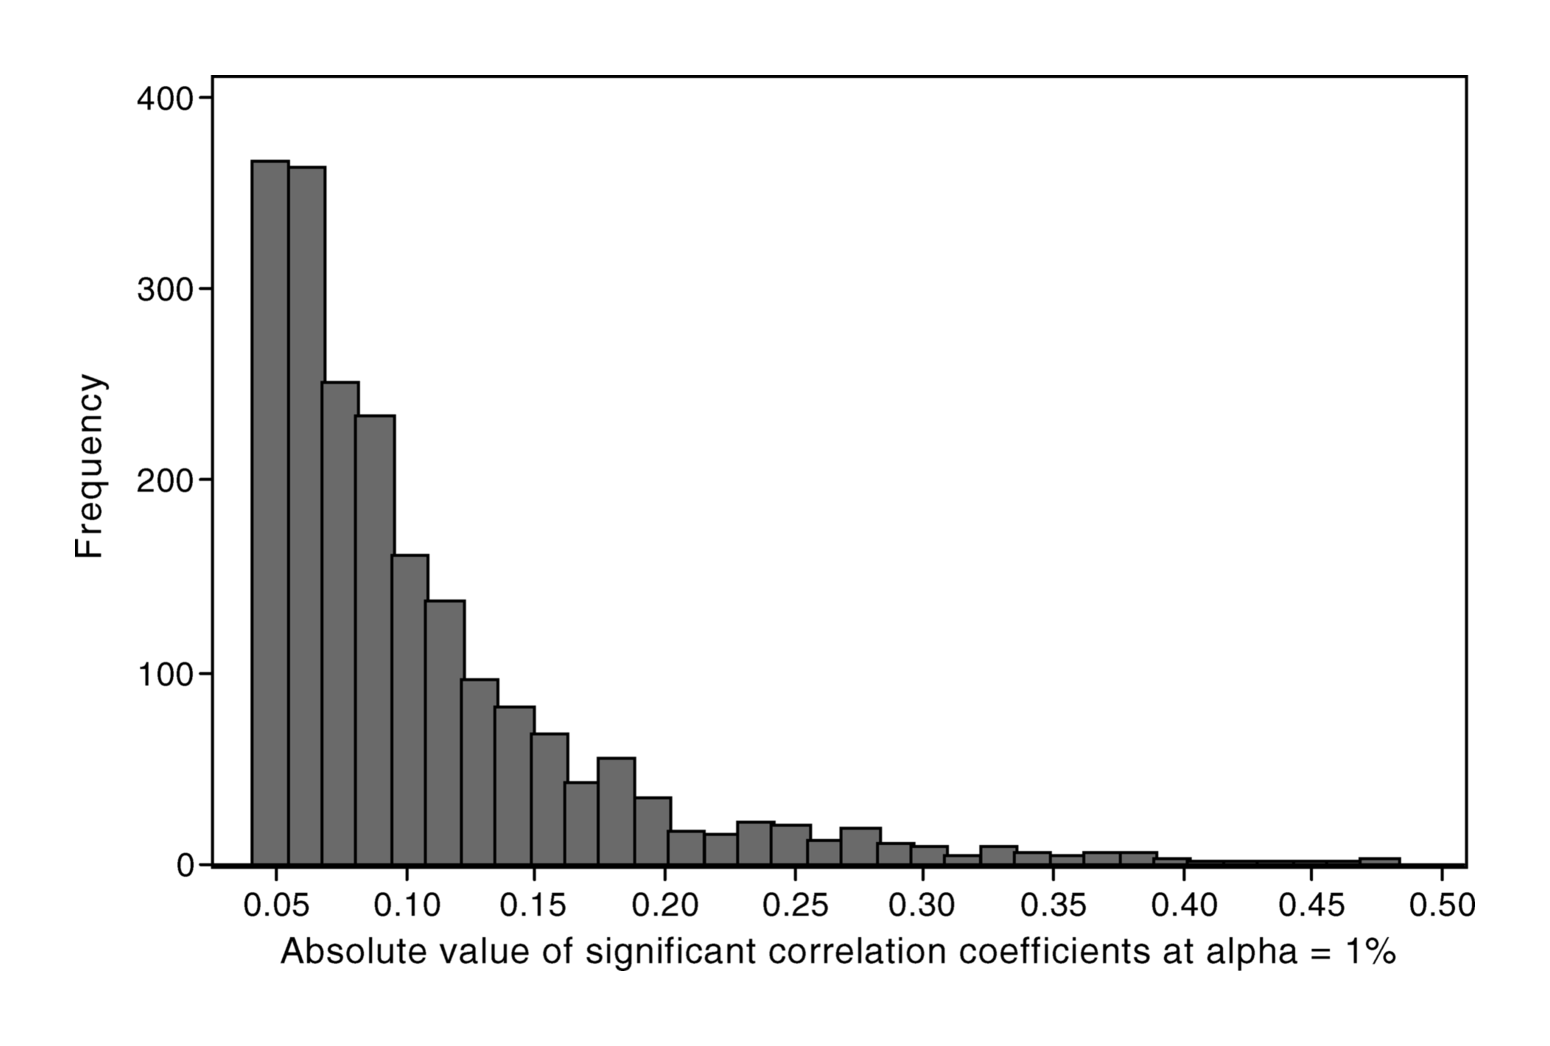 Smith et al 2007: “Figure 1. Histogram of Statistically Significant (at α = 1%) Age-Adjusted Pairwise Correlation Coefficients between 96 Nongenetic Characteristics. British Women Aged 60–79 y”